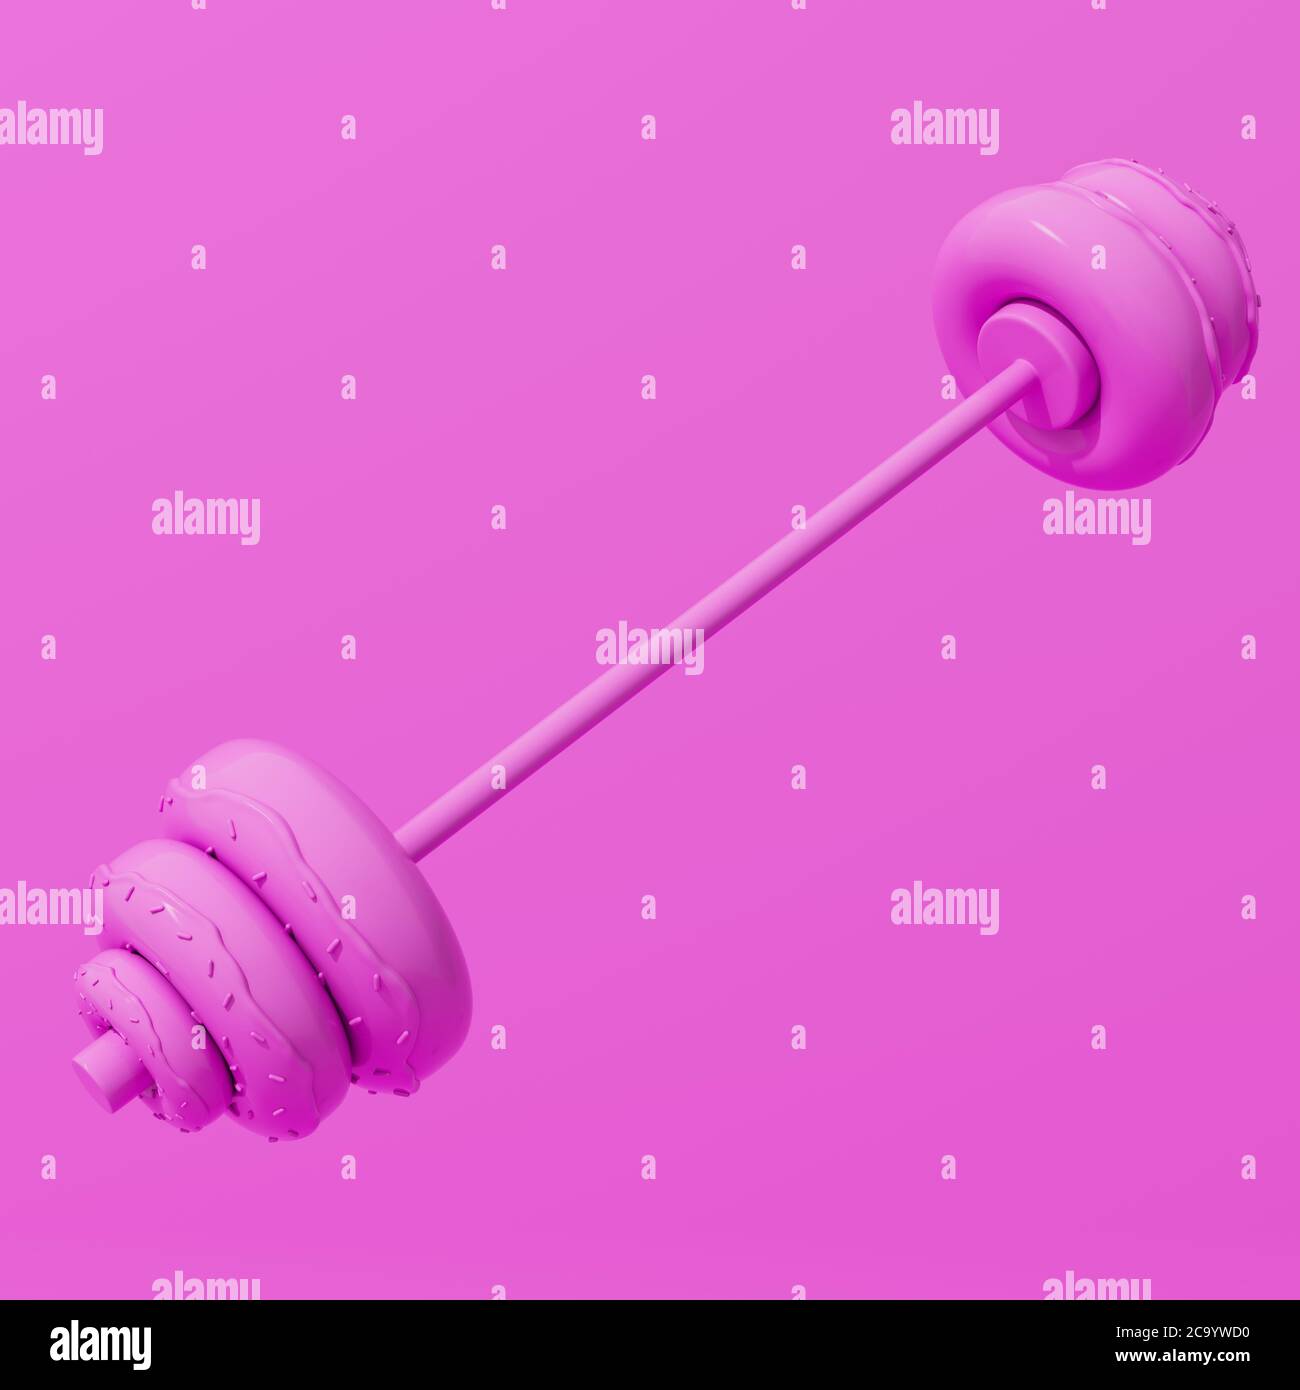 Stylized gym barbell made of donuts on a pink background. Weight and fat loss. Dieting, sugar craving, additction Stock Photo